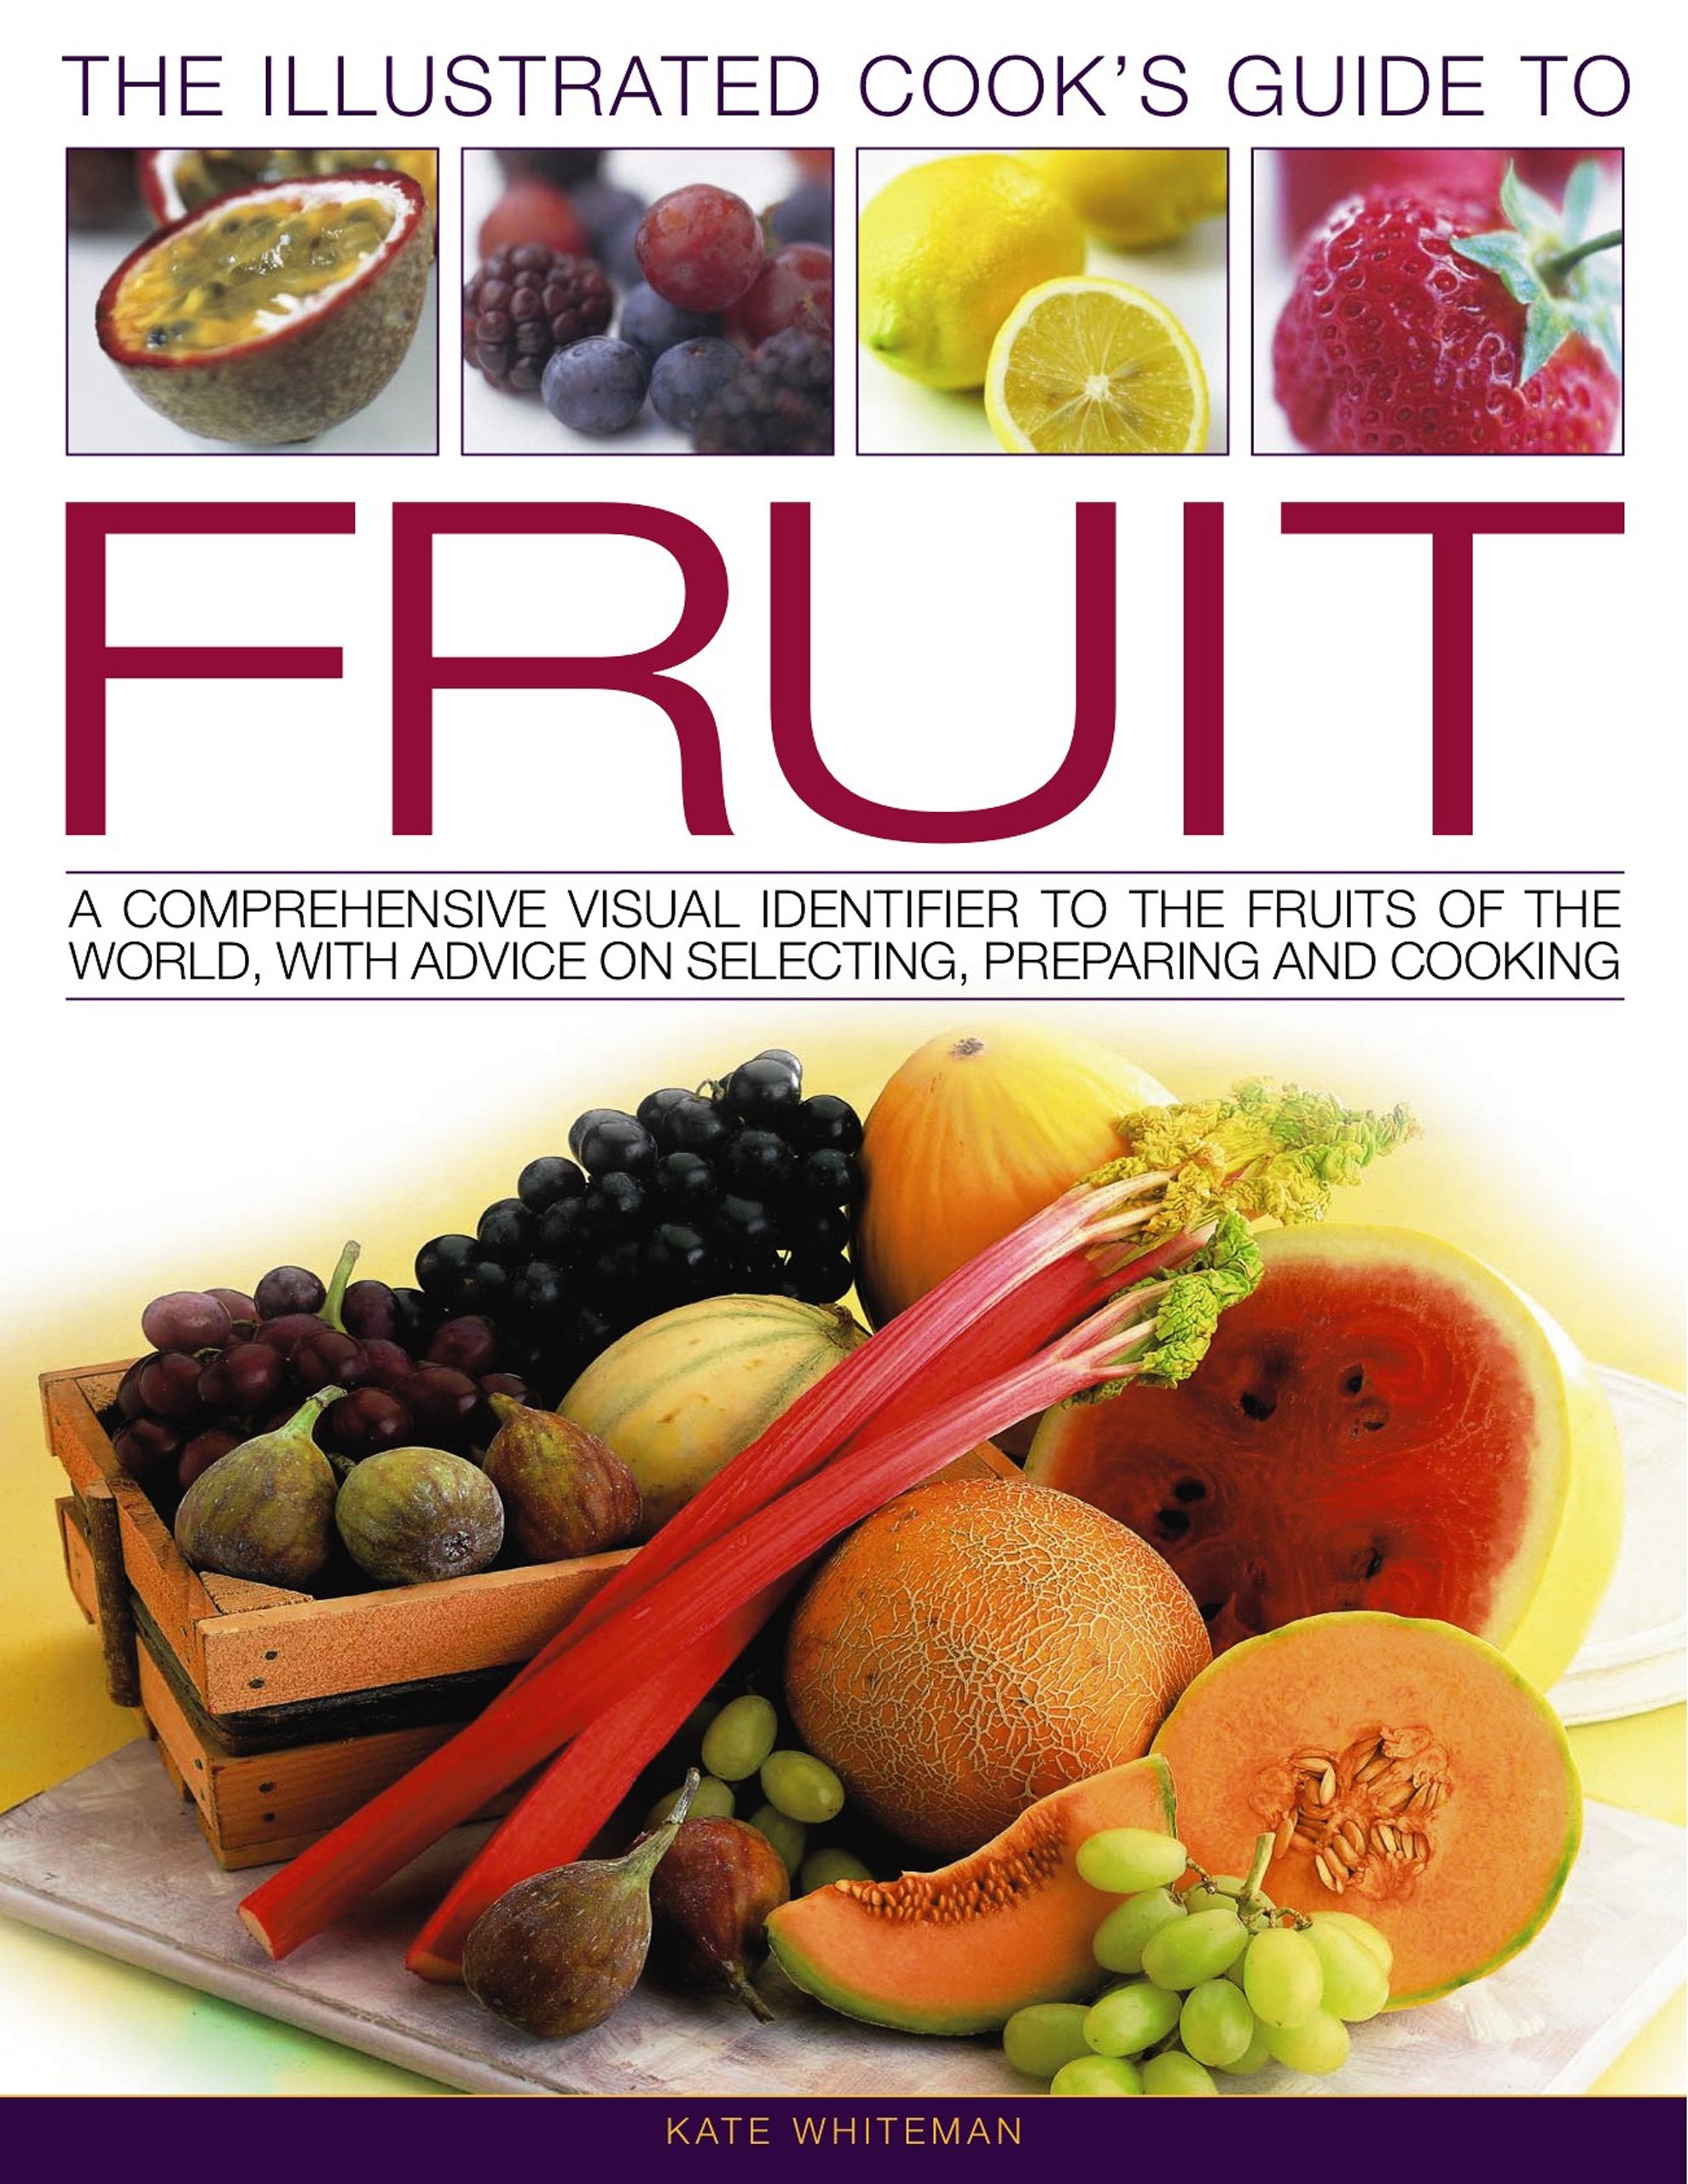 Ann: The Illustrated cook's guide to fruit -  New Guide to Fruit